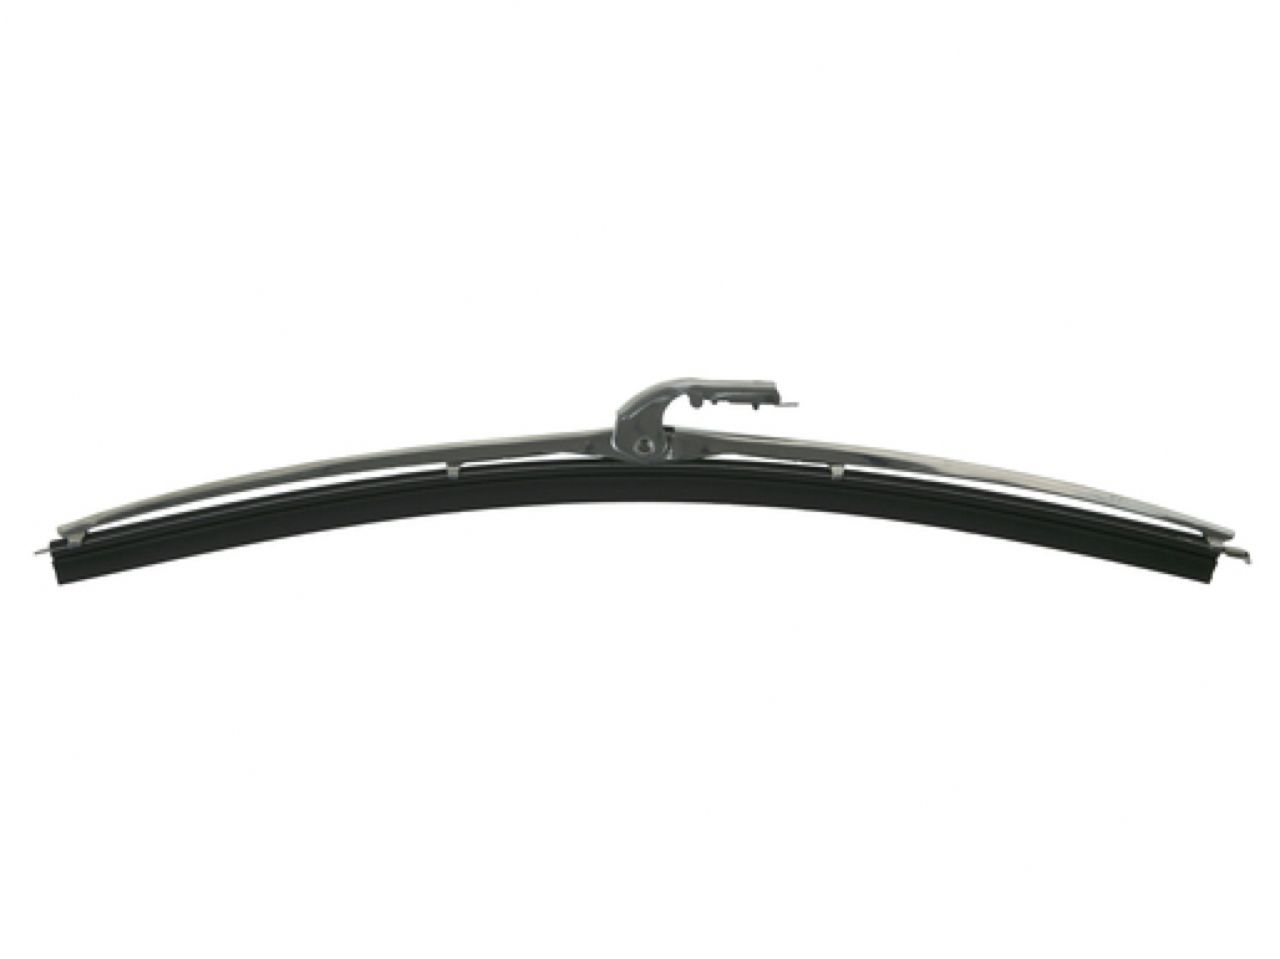 Anco Windshield Wipers 20-13 Item Image